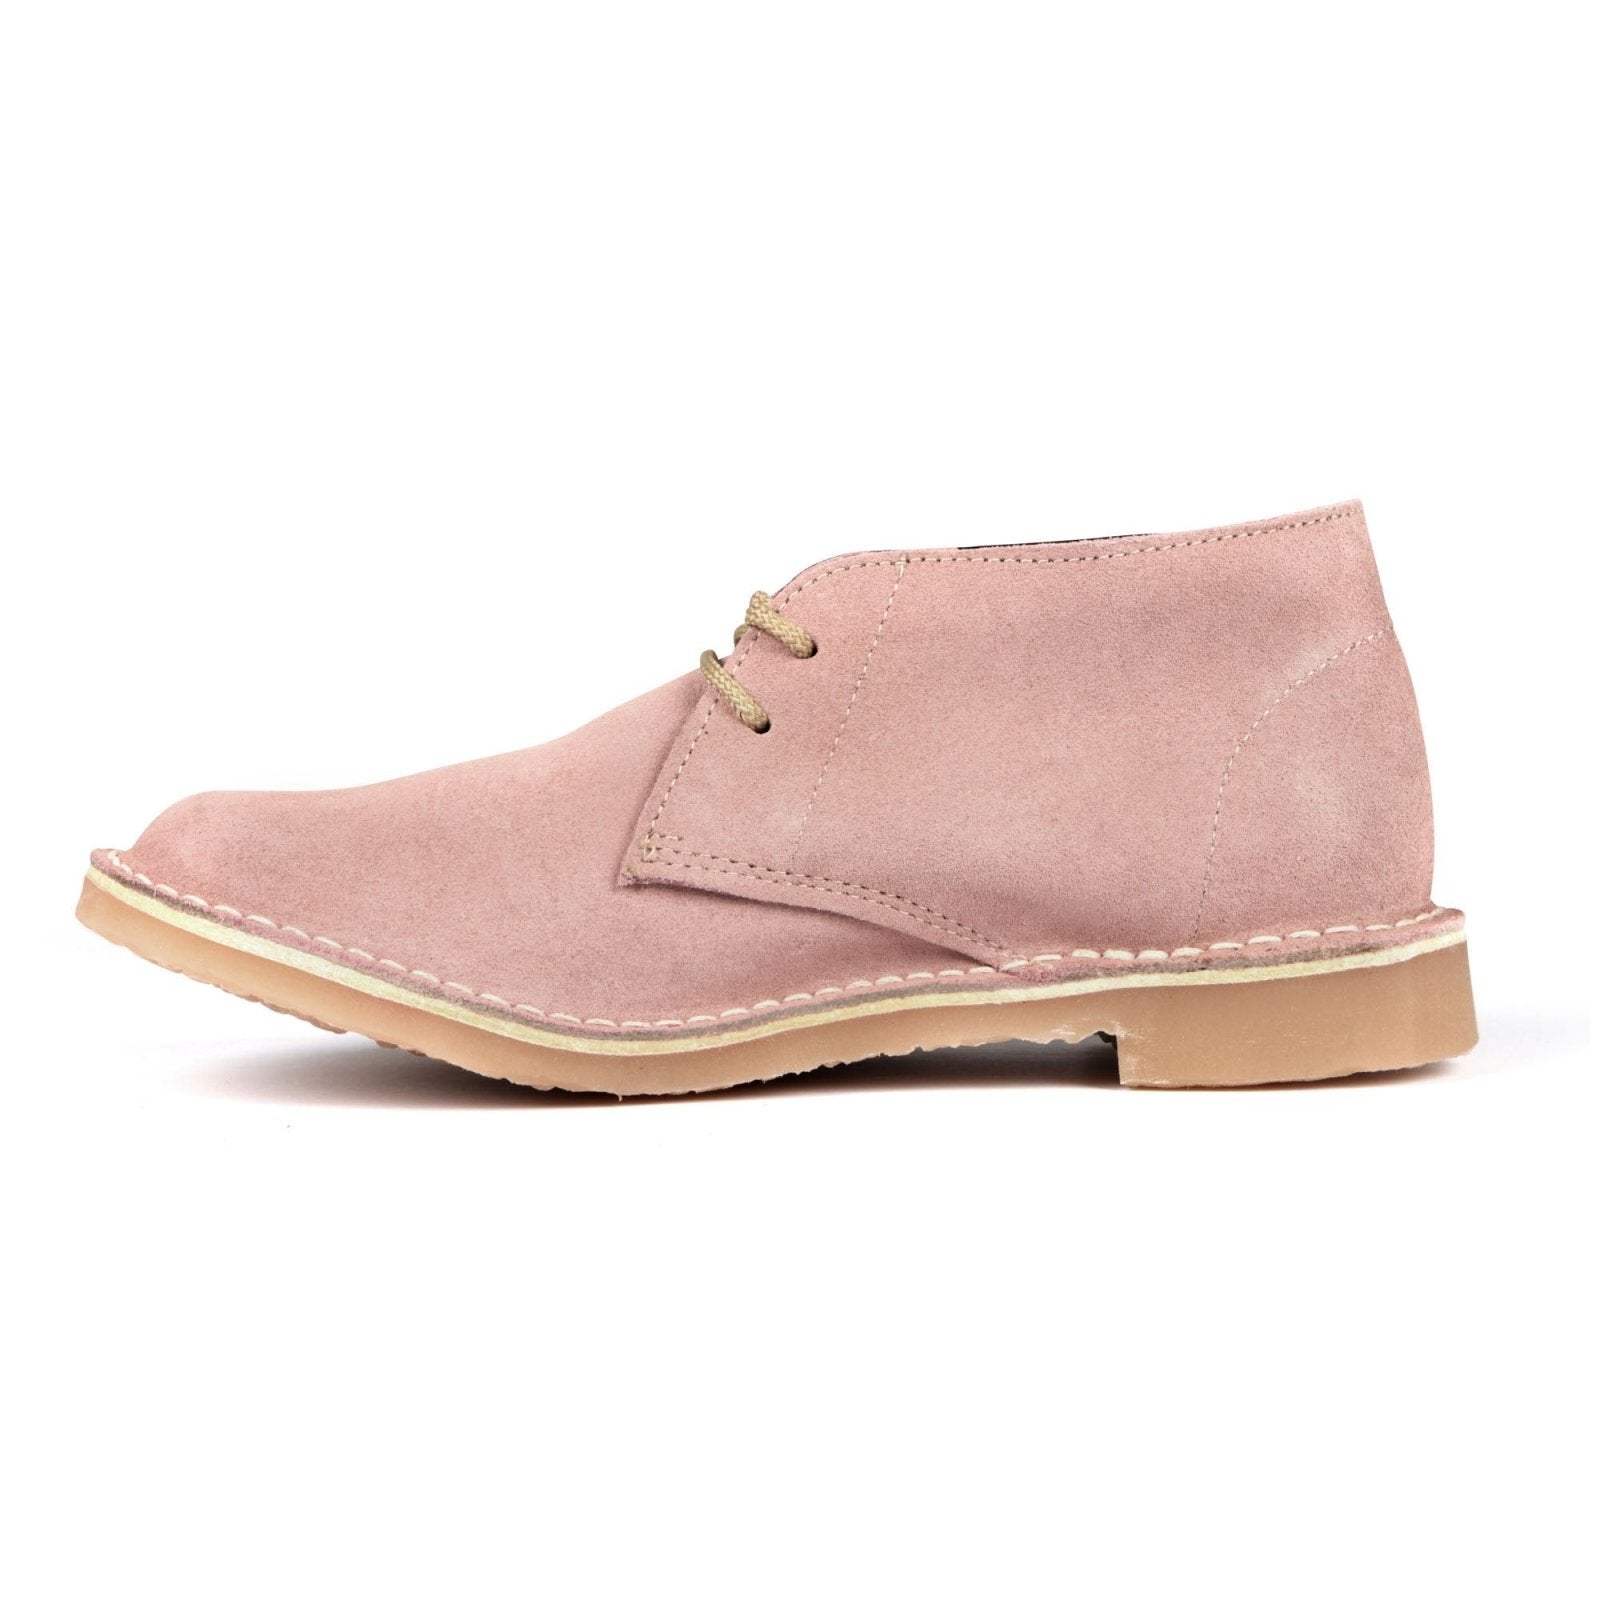 Hunter Vellie Unisex Premium Suede - Baby Pink - Freestyle SA Proudly local vellies leather boots veldskoens vellies leather shoes suede veldskoens